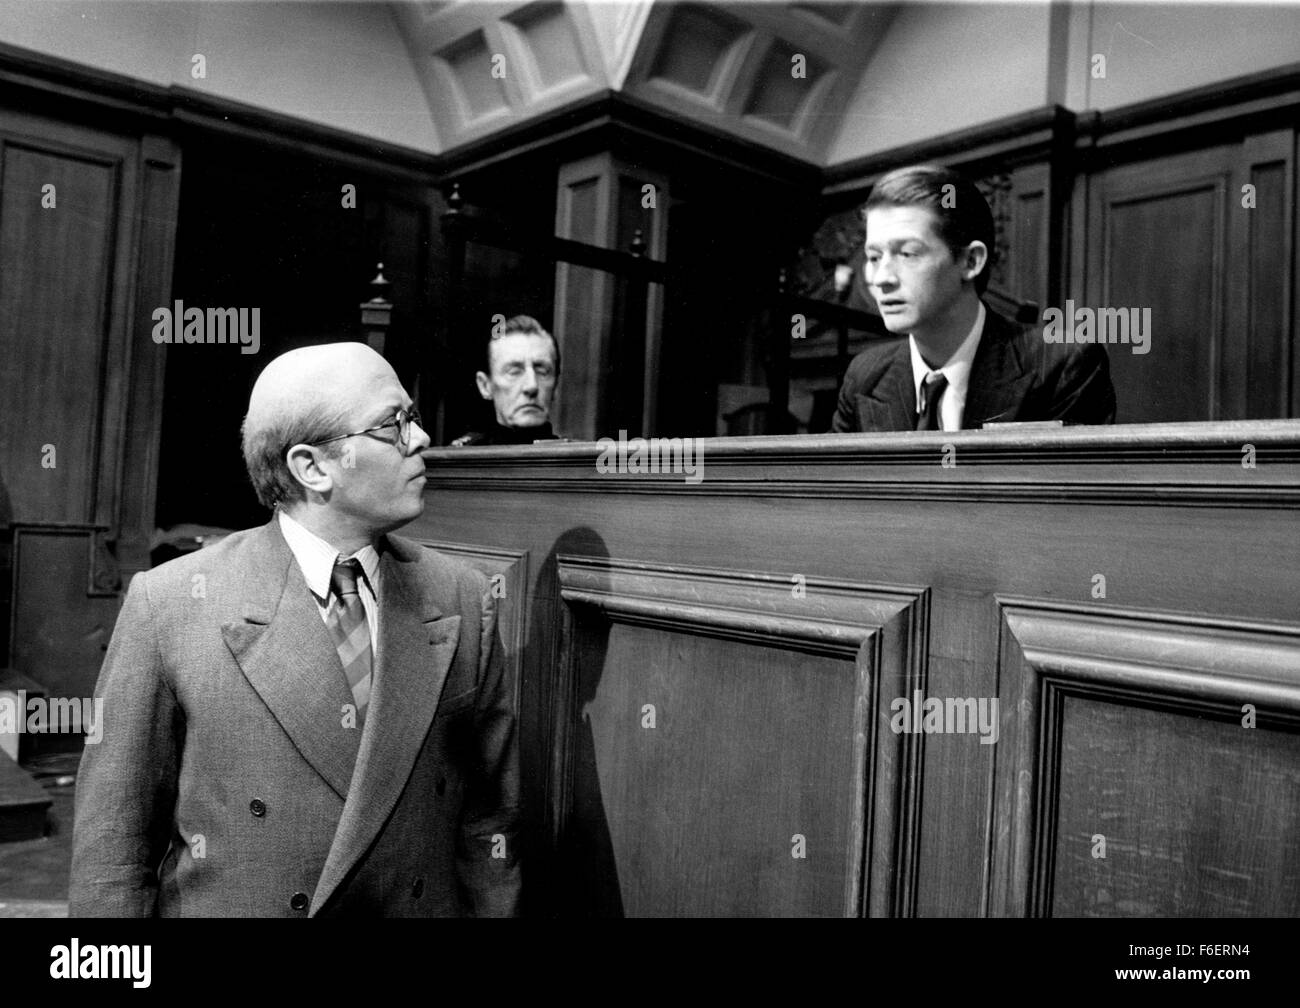 June 16, 1970 - London, England, U.K. - An exact replica of the No. 1 Courtroom at London's Central Criminal Court (The Old Bailey) has been built at Shepperton Studios for a film reconstruction of a trial that made English legal history. It was built for the film '10 Rillington Place', all about notorious English mass-murderer John Regibald Christie, who in 1950, framed another man, Timothy John Evans for crimes committed by Christie himself. The picture shows actors RICHARD ATTENBOROUGH and JOHN HURT in a scene of the today's filming at Shepperton. (Credit Image: c KEYSTONE Pictures USA/ Stock Photo